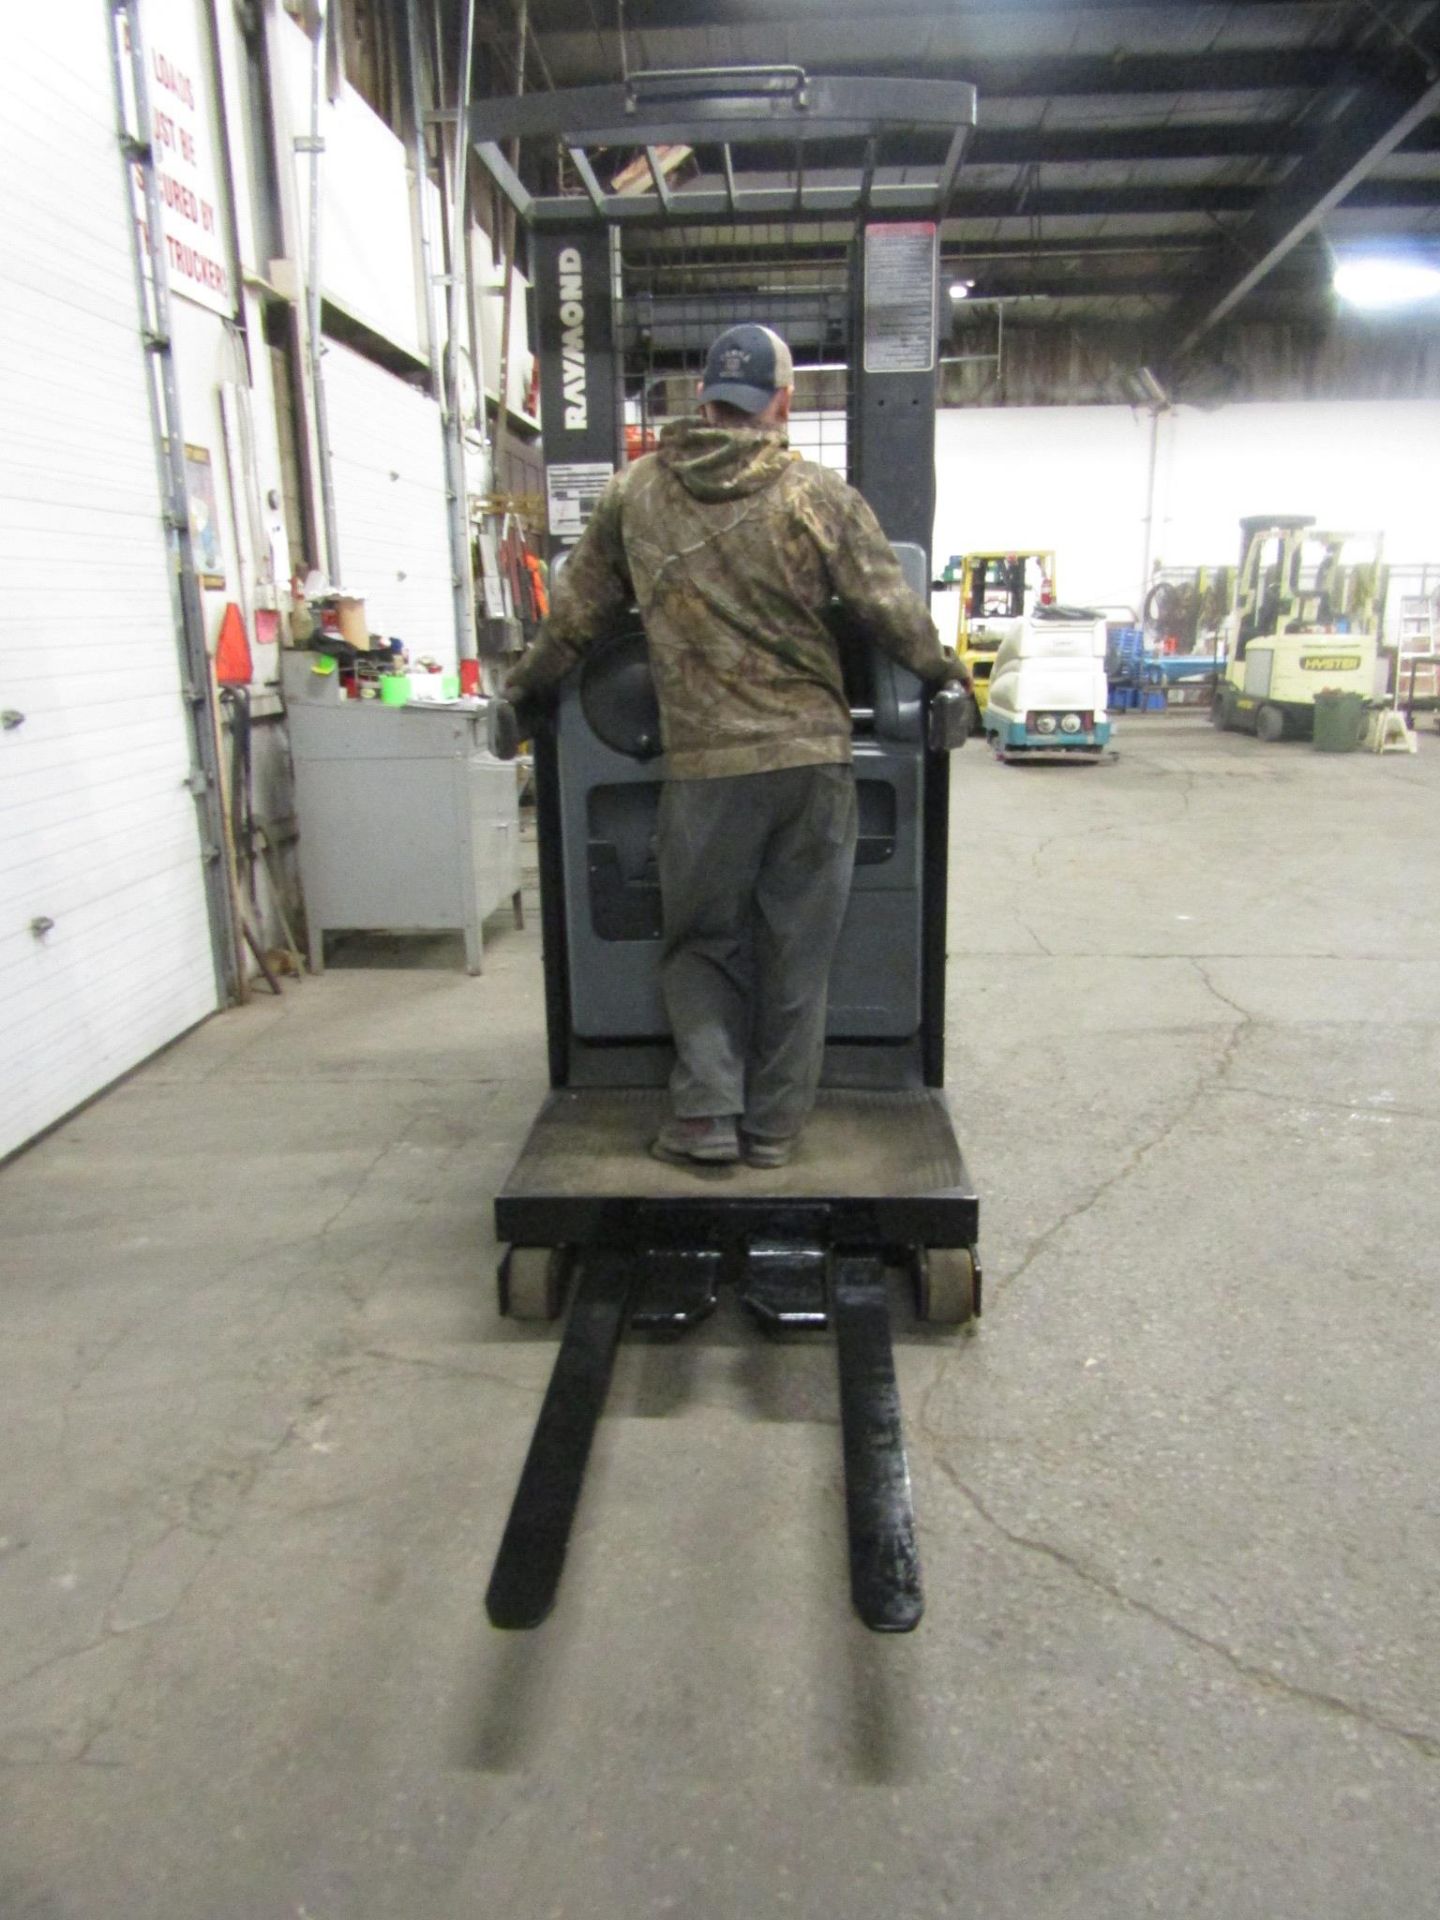 Raymond Stacker Order Picker Pallet Lifter unit 3000lbs capacity ELECTRIC with charger - Image 2 of 2